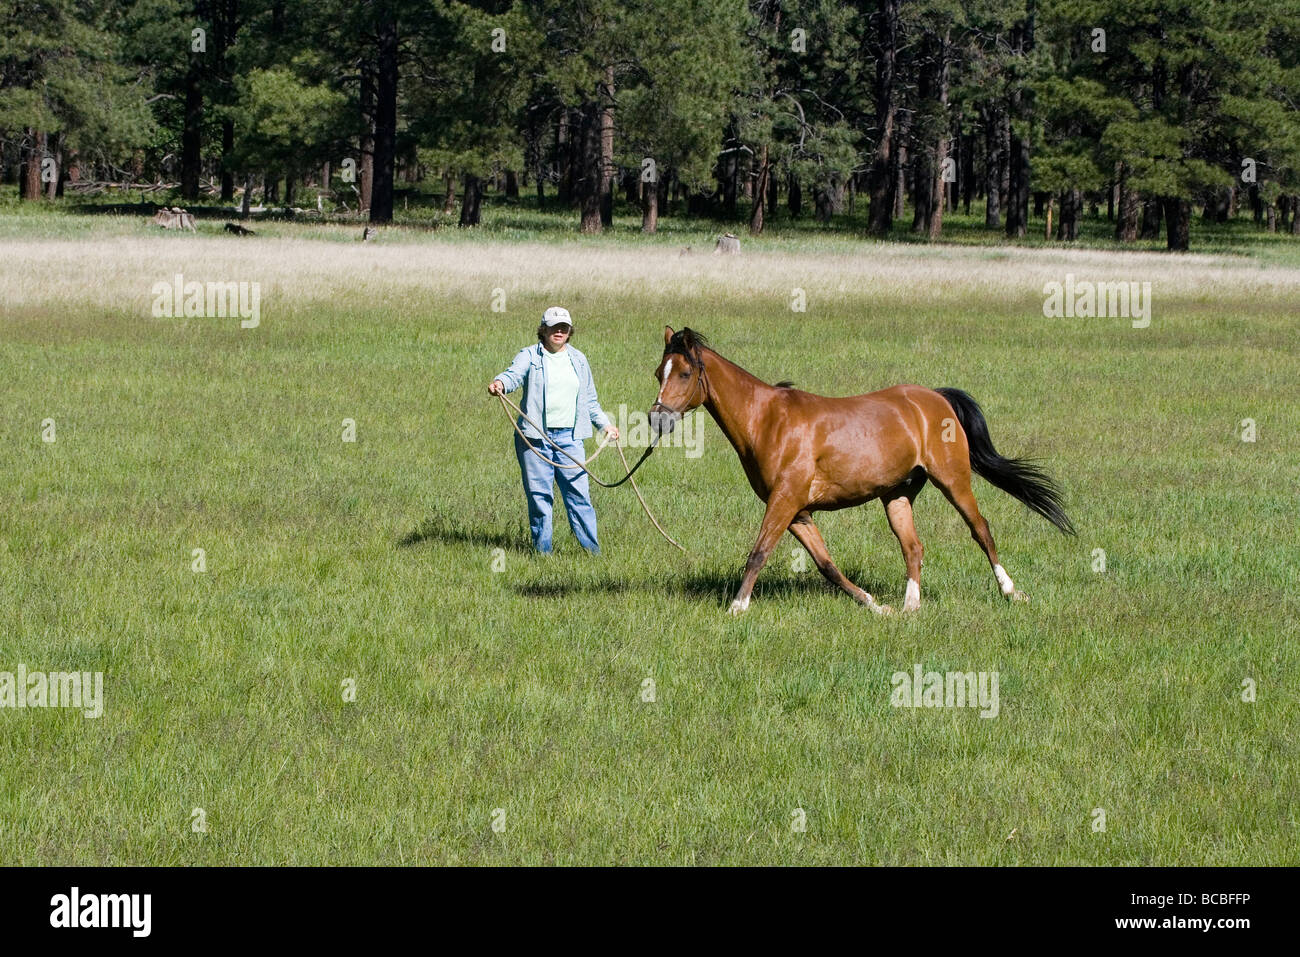 Arabian Horse being trained Stock Photo